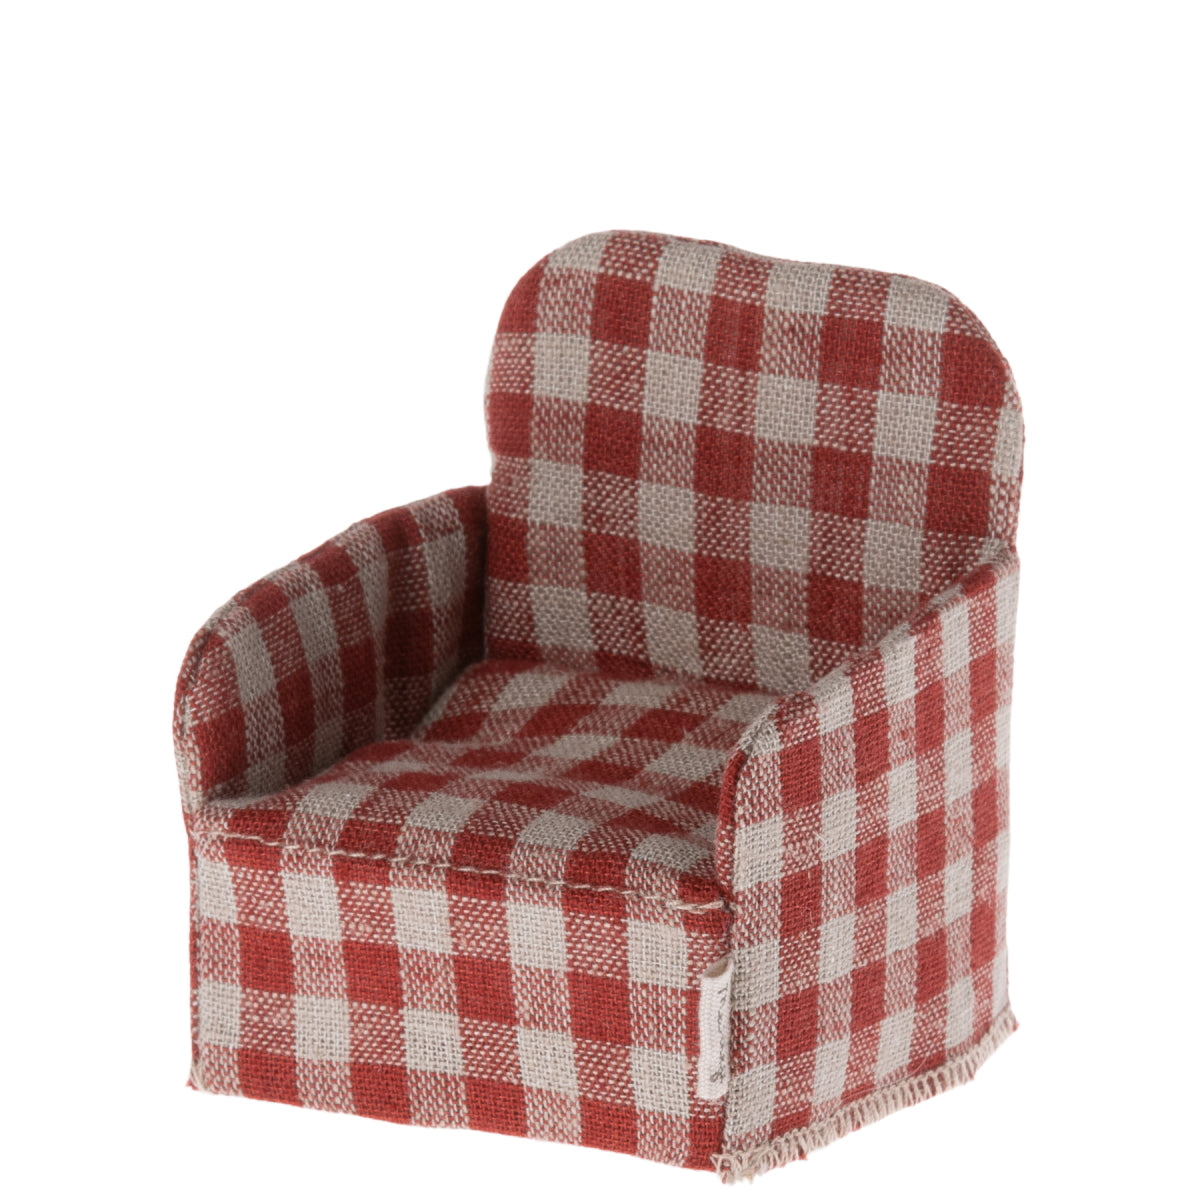 Chair for Mouse (Red)